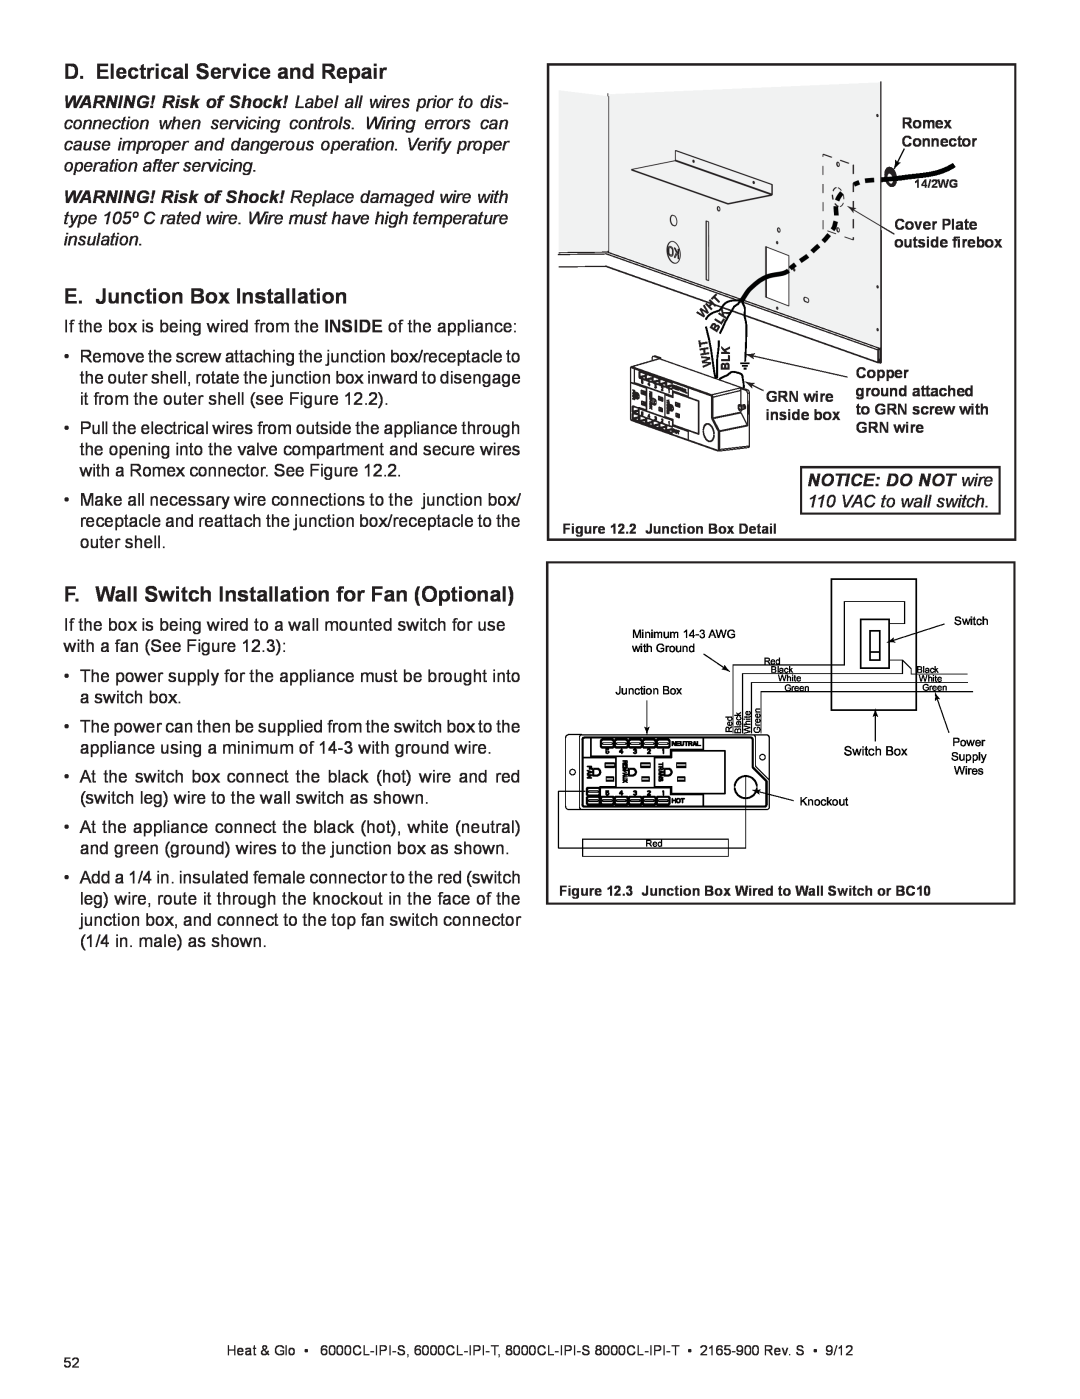 Heat & Glo LifeStyle 8000CL-IPI-S D. Electrical Service and Repair, E. Junction Box Installation, NOTICE: DO NOT wire 